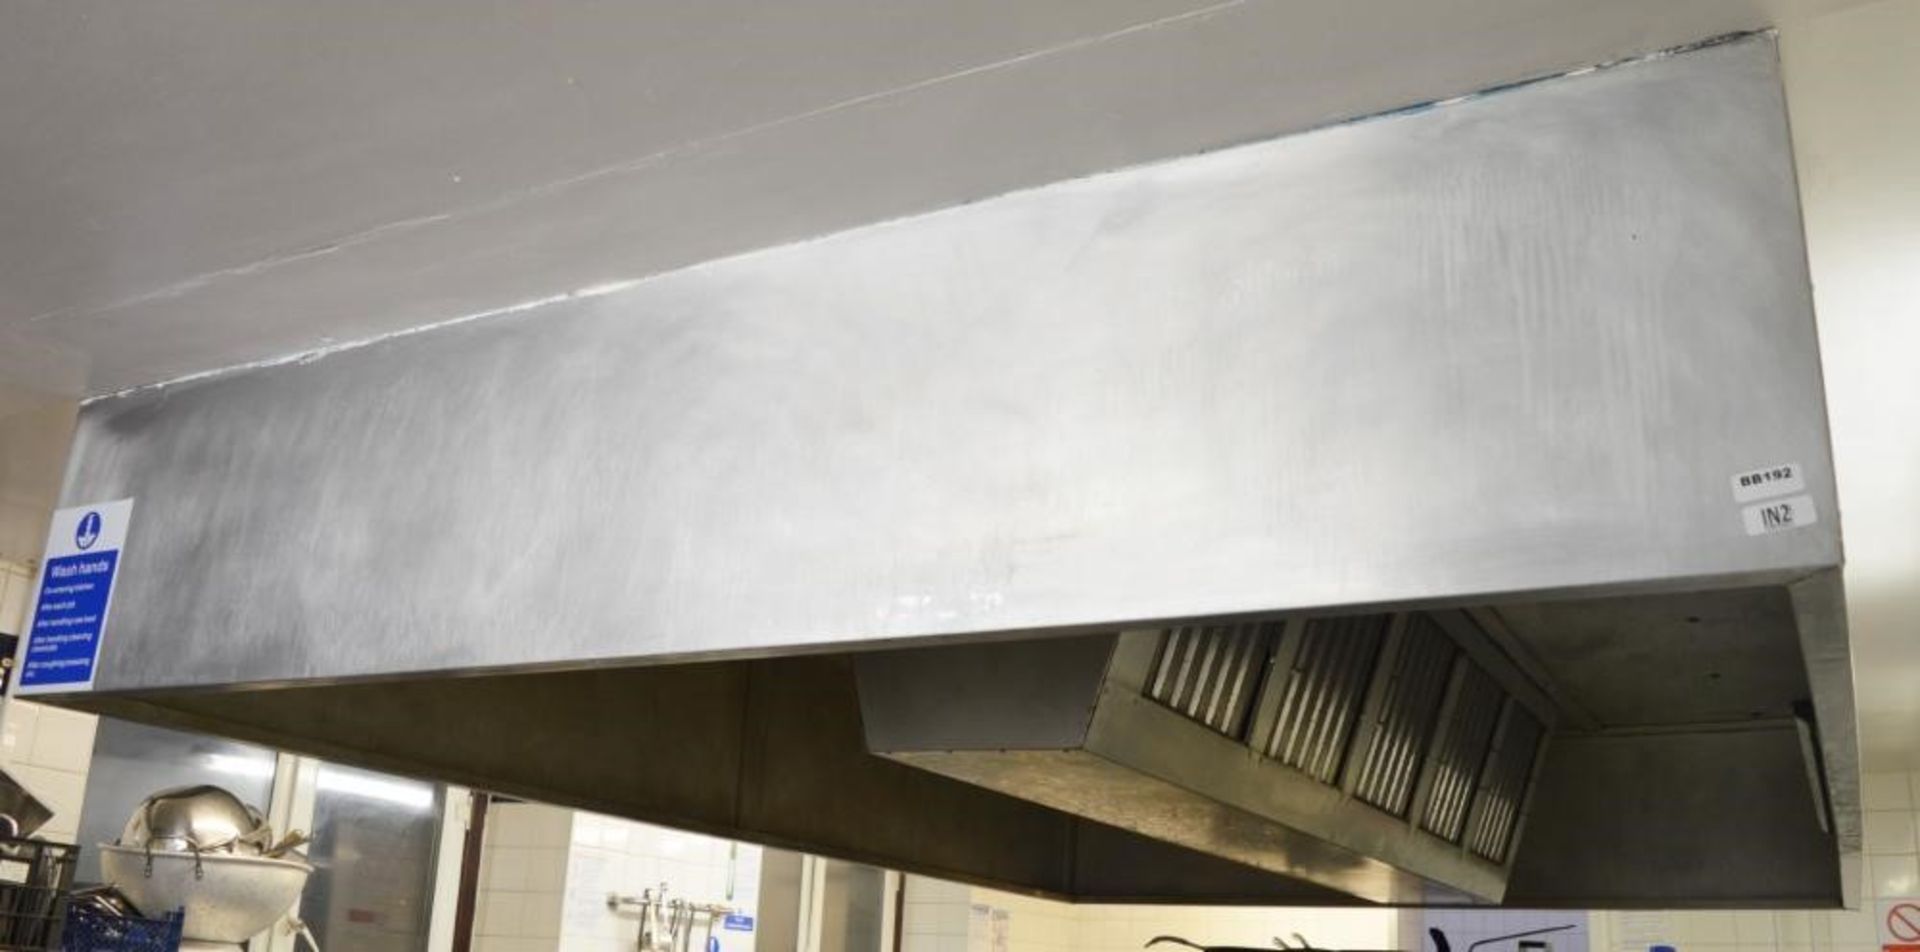 1 x Stainless Steel Canopy Extractor Hood With Filters - H46 x W232 x L351 cms - Filter Unit 250 x 5 - Image 2 of 4